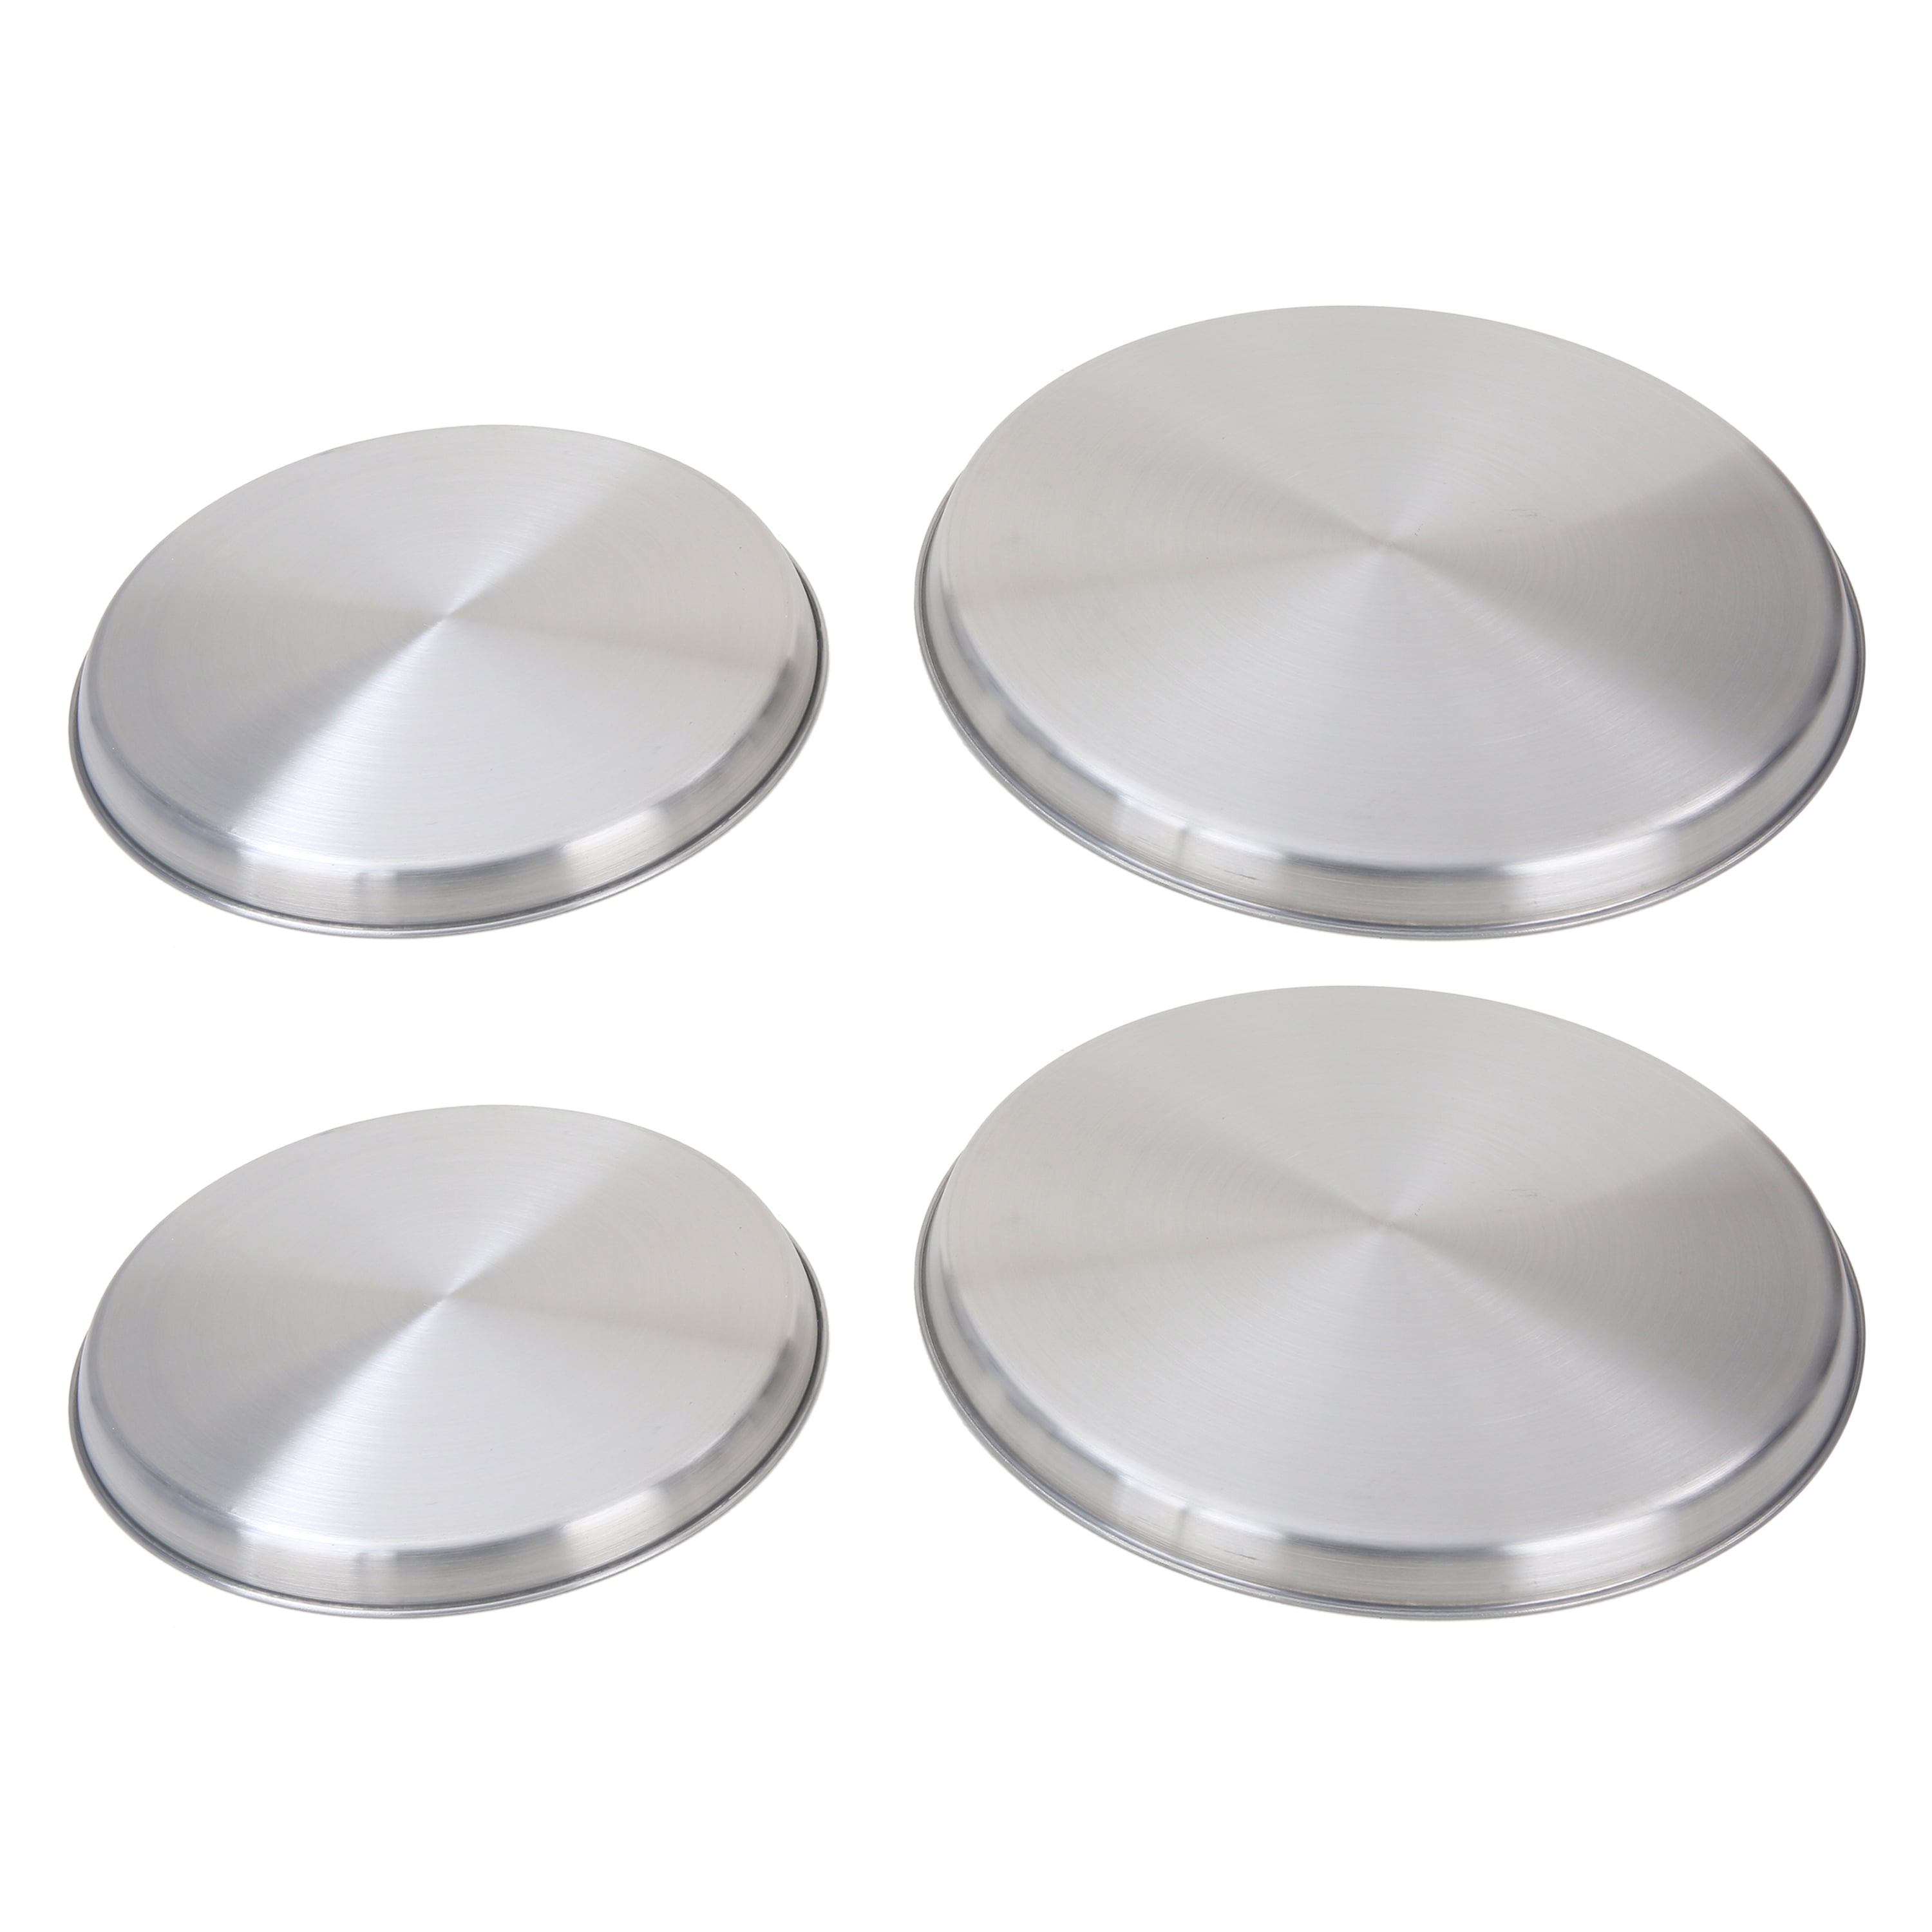 Oumefar 4pcs/set Stainless Steel Kitchen Stove Top Burners Covers Cooker Protection Silver Kitchen Stove Cover for Standard Sized Electric Stove